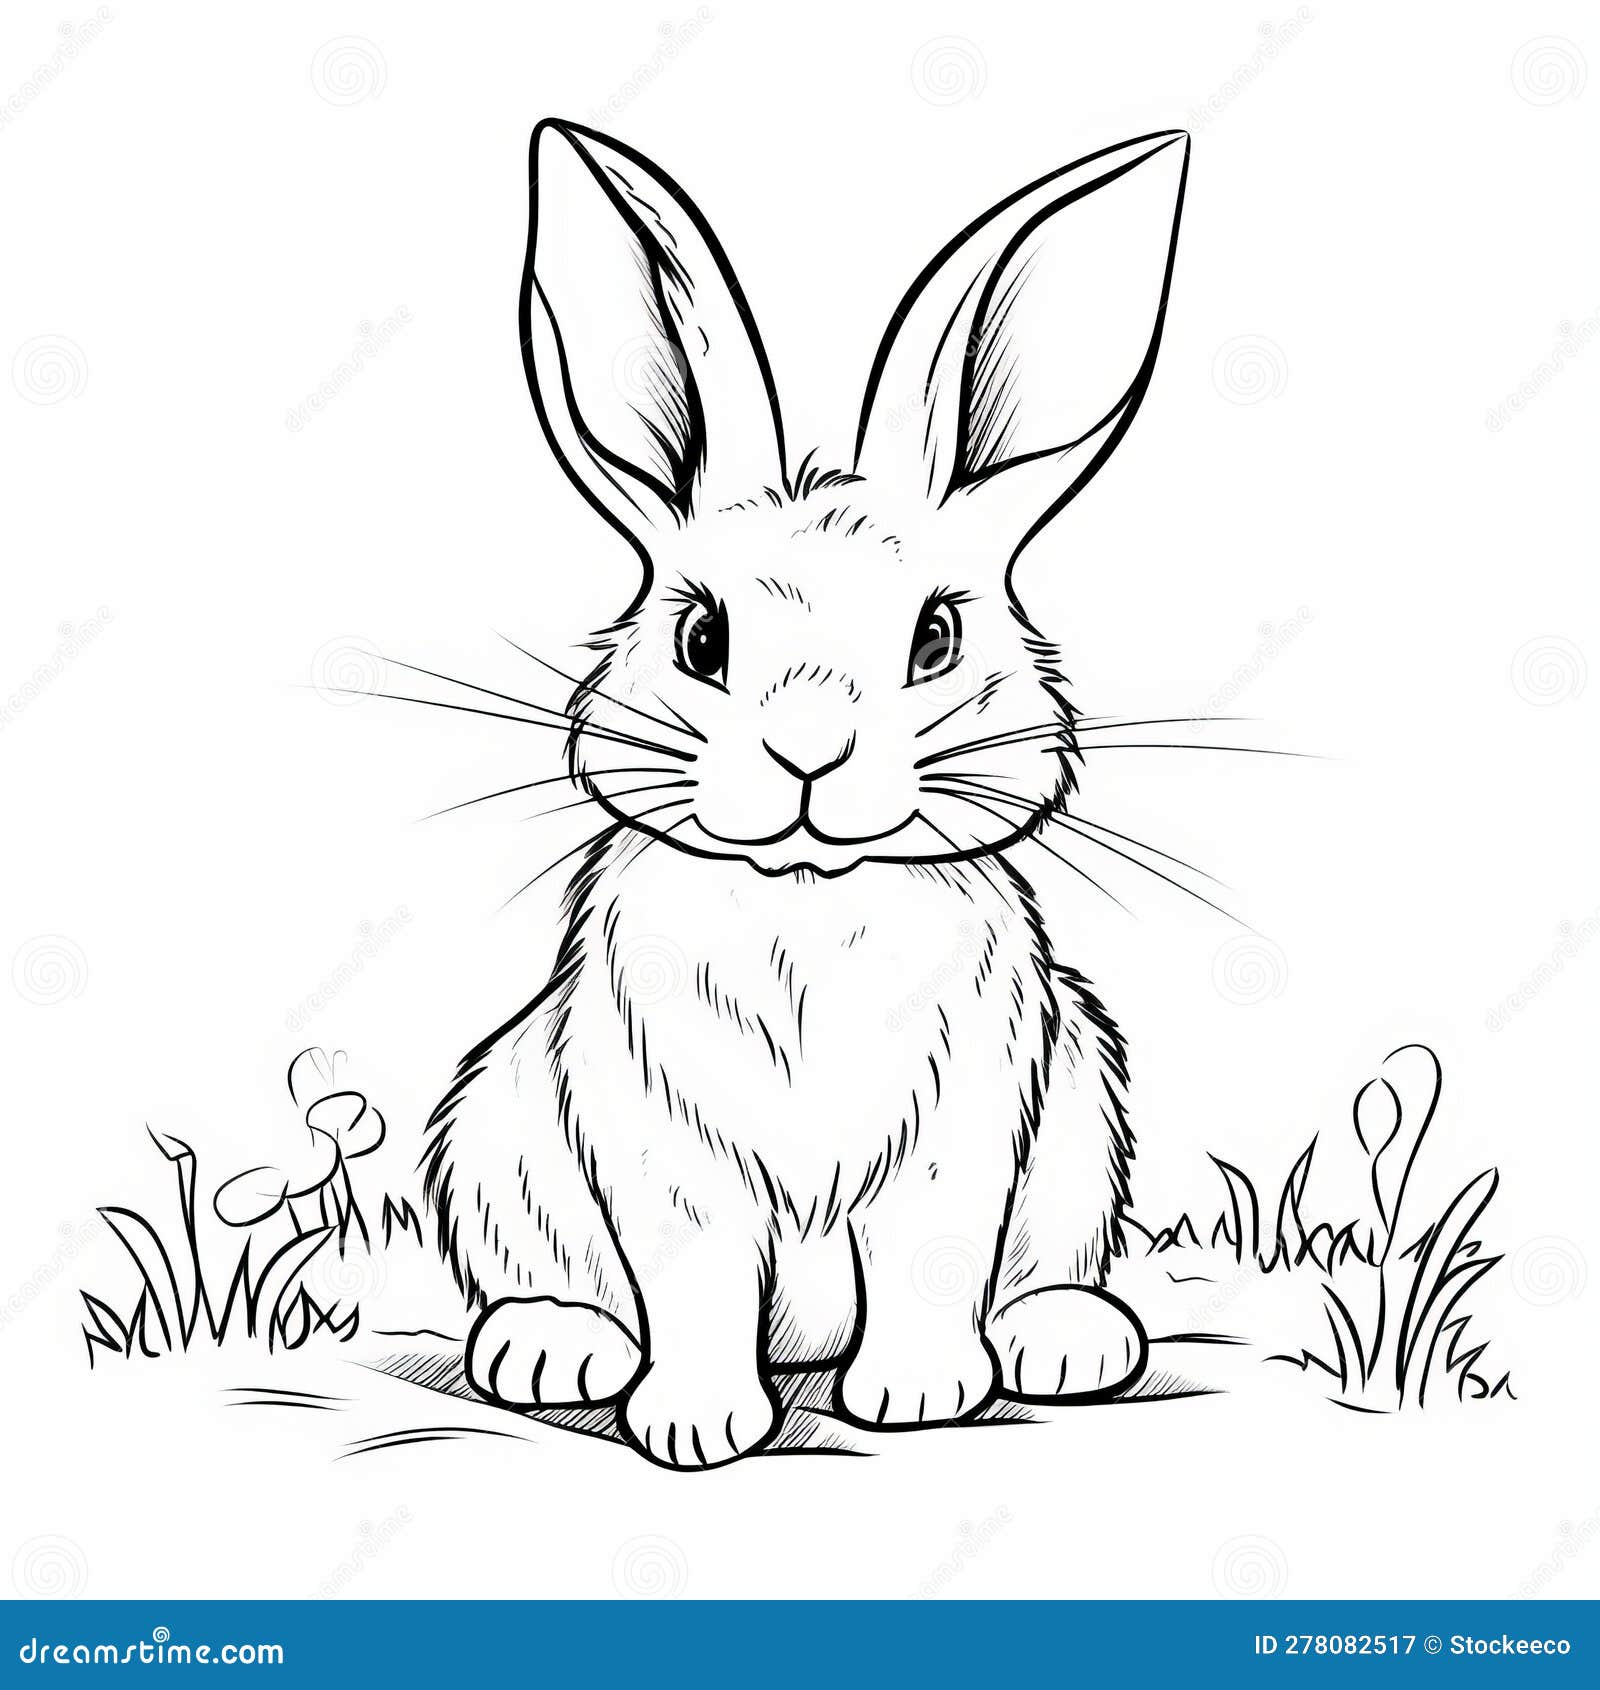 How to Draw a Bunny in a Few Easy Steps | Easy Drawing Guides | Drawing for  kids, Easy drawings, Bunny drawing